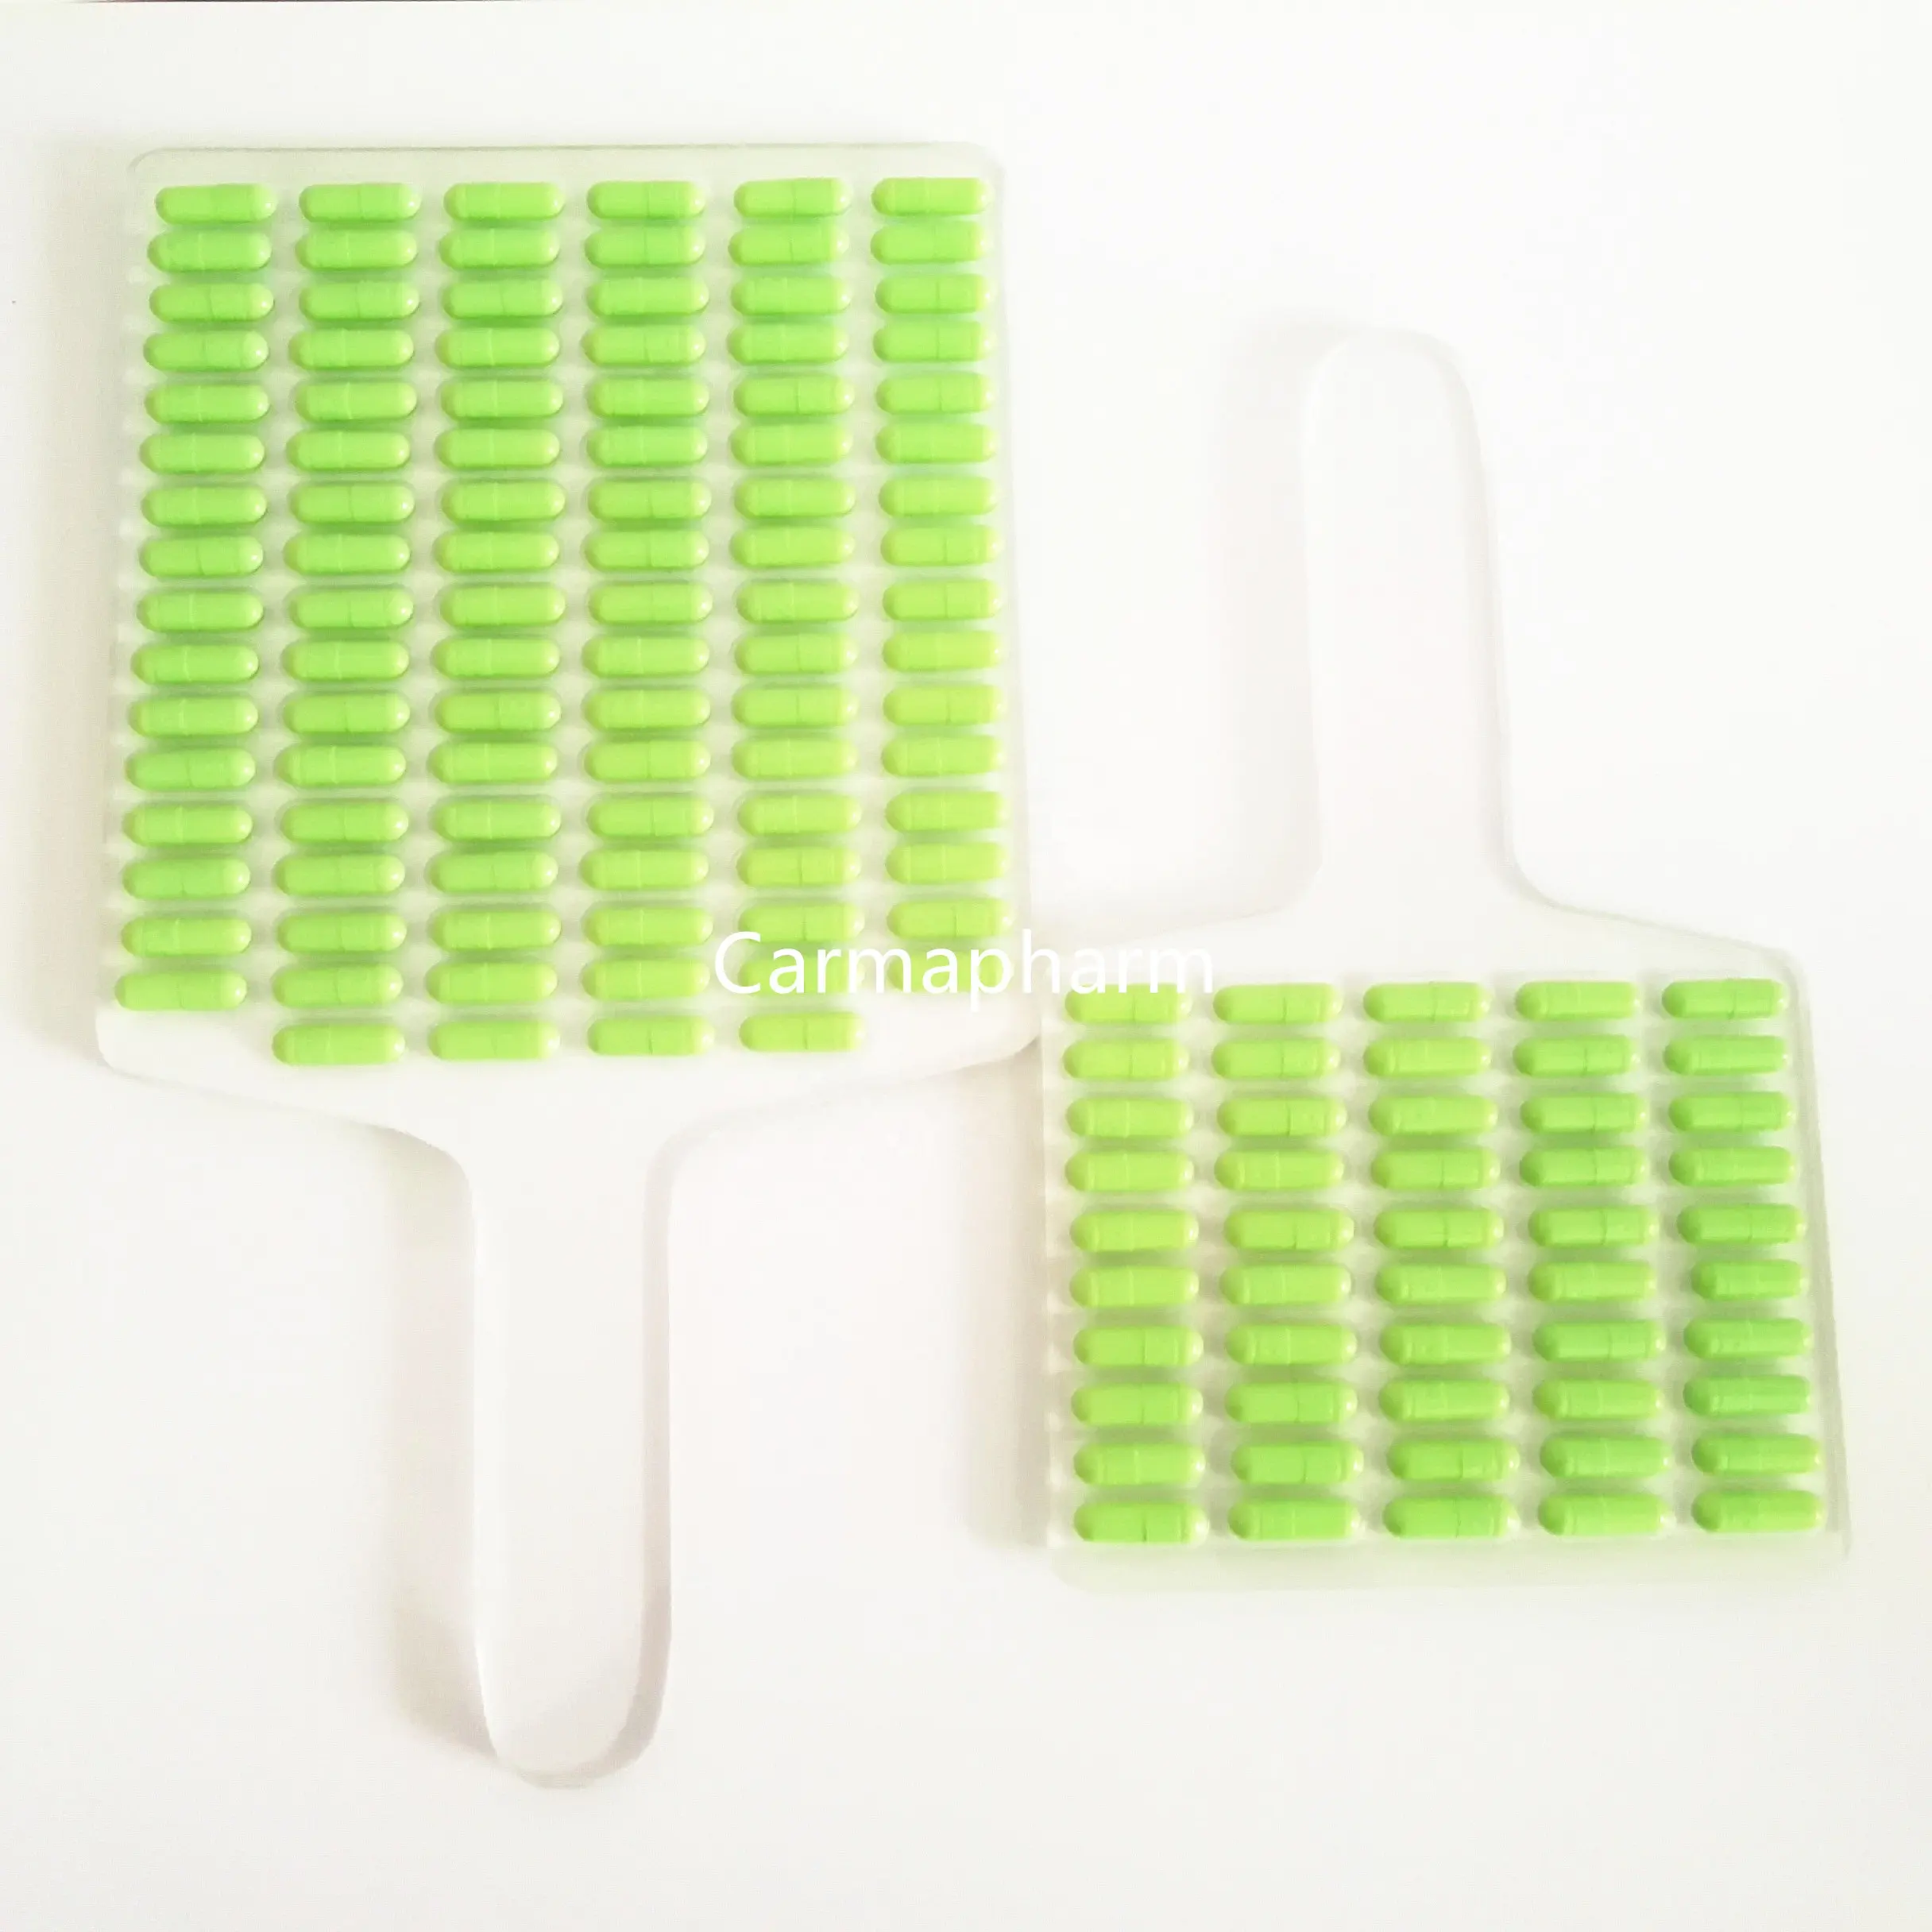 100 Holes Small Hand Manual Capsule Counter Counting Plate machine